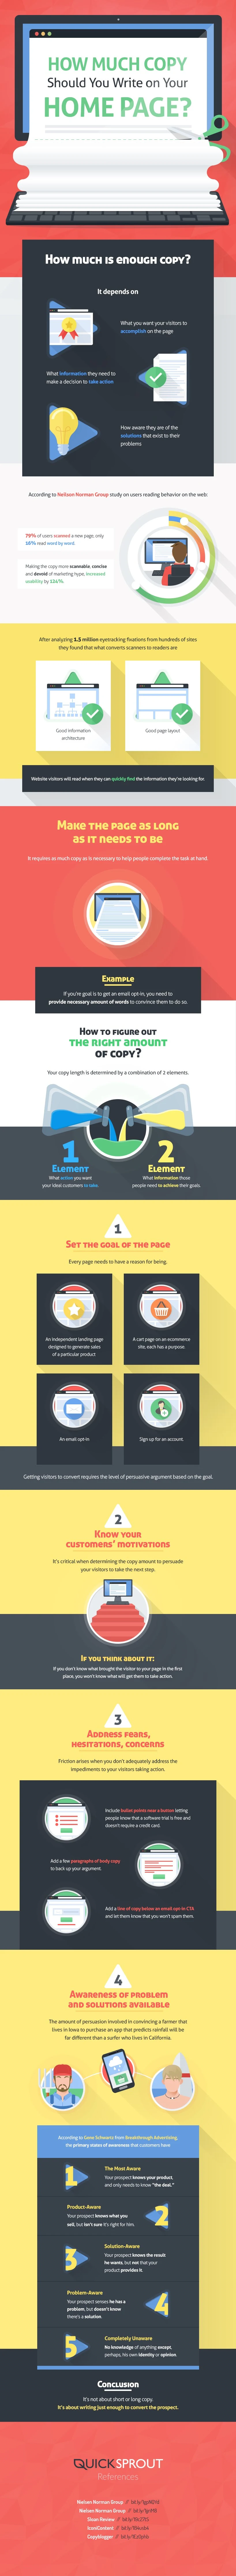 How Much Copy Should You Write on Your Homepage? - #infographic